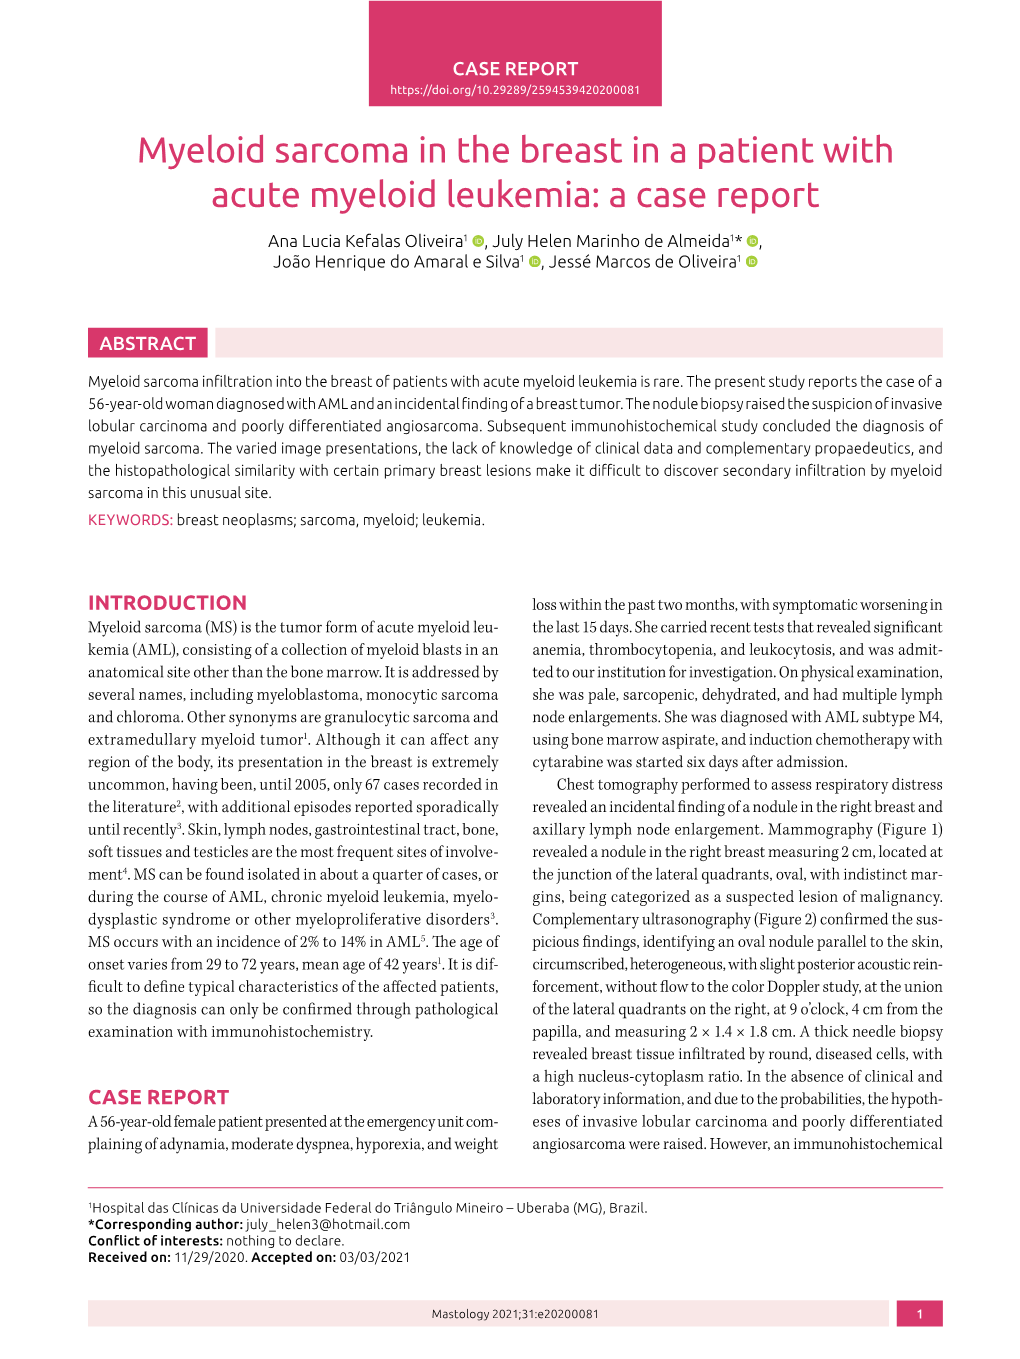 Myeloid Sarcoma in the Breast in a Patient with Acute Myeloid Leukemia: a Case Report